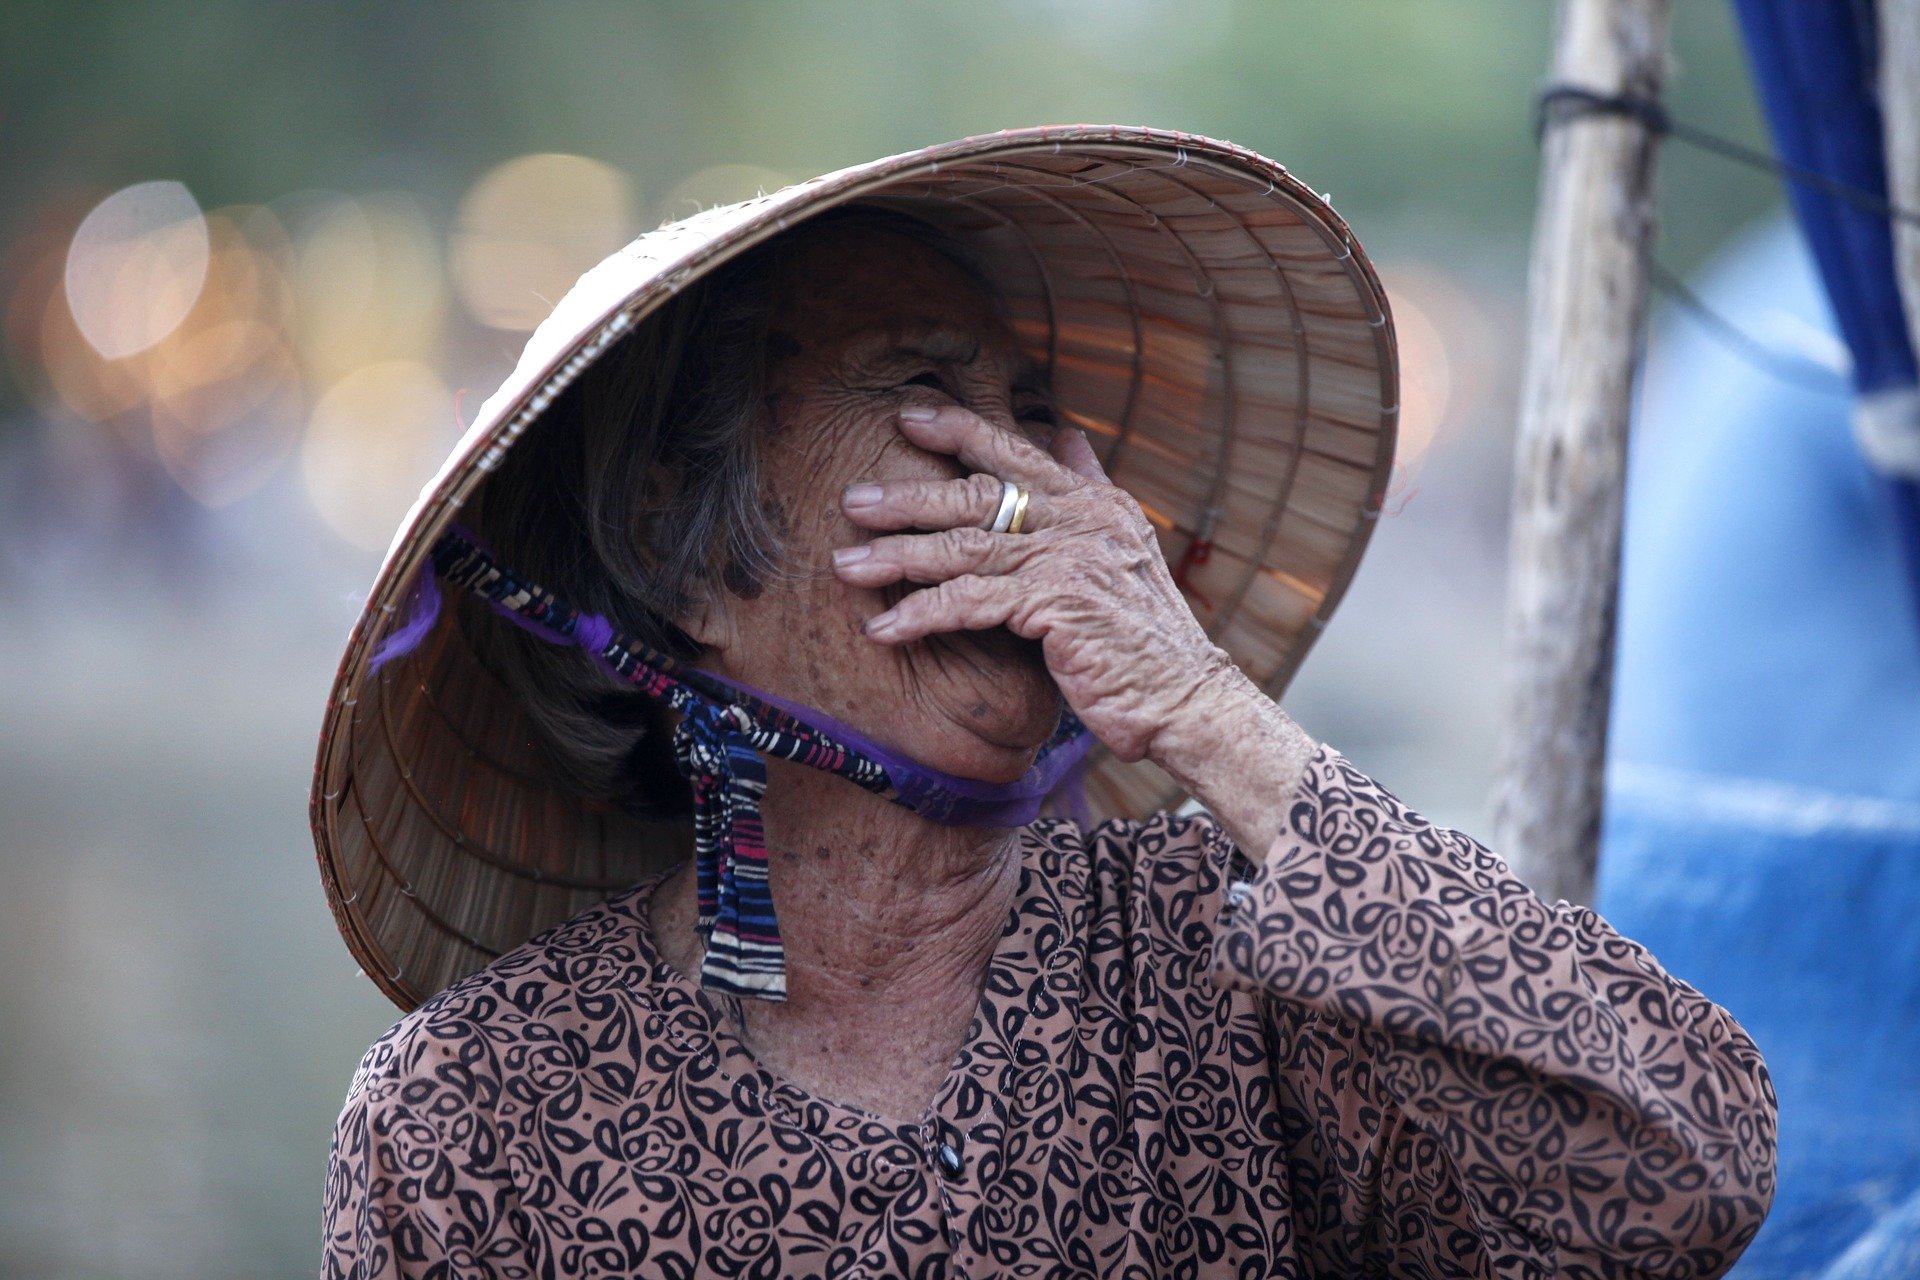 An old woman wearing a hat, covering her mouth while laughing | Photo: Pixabay/Thangphan